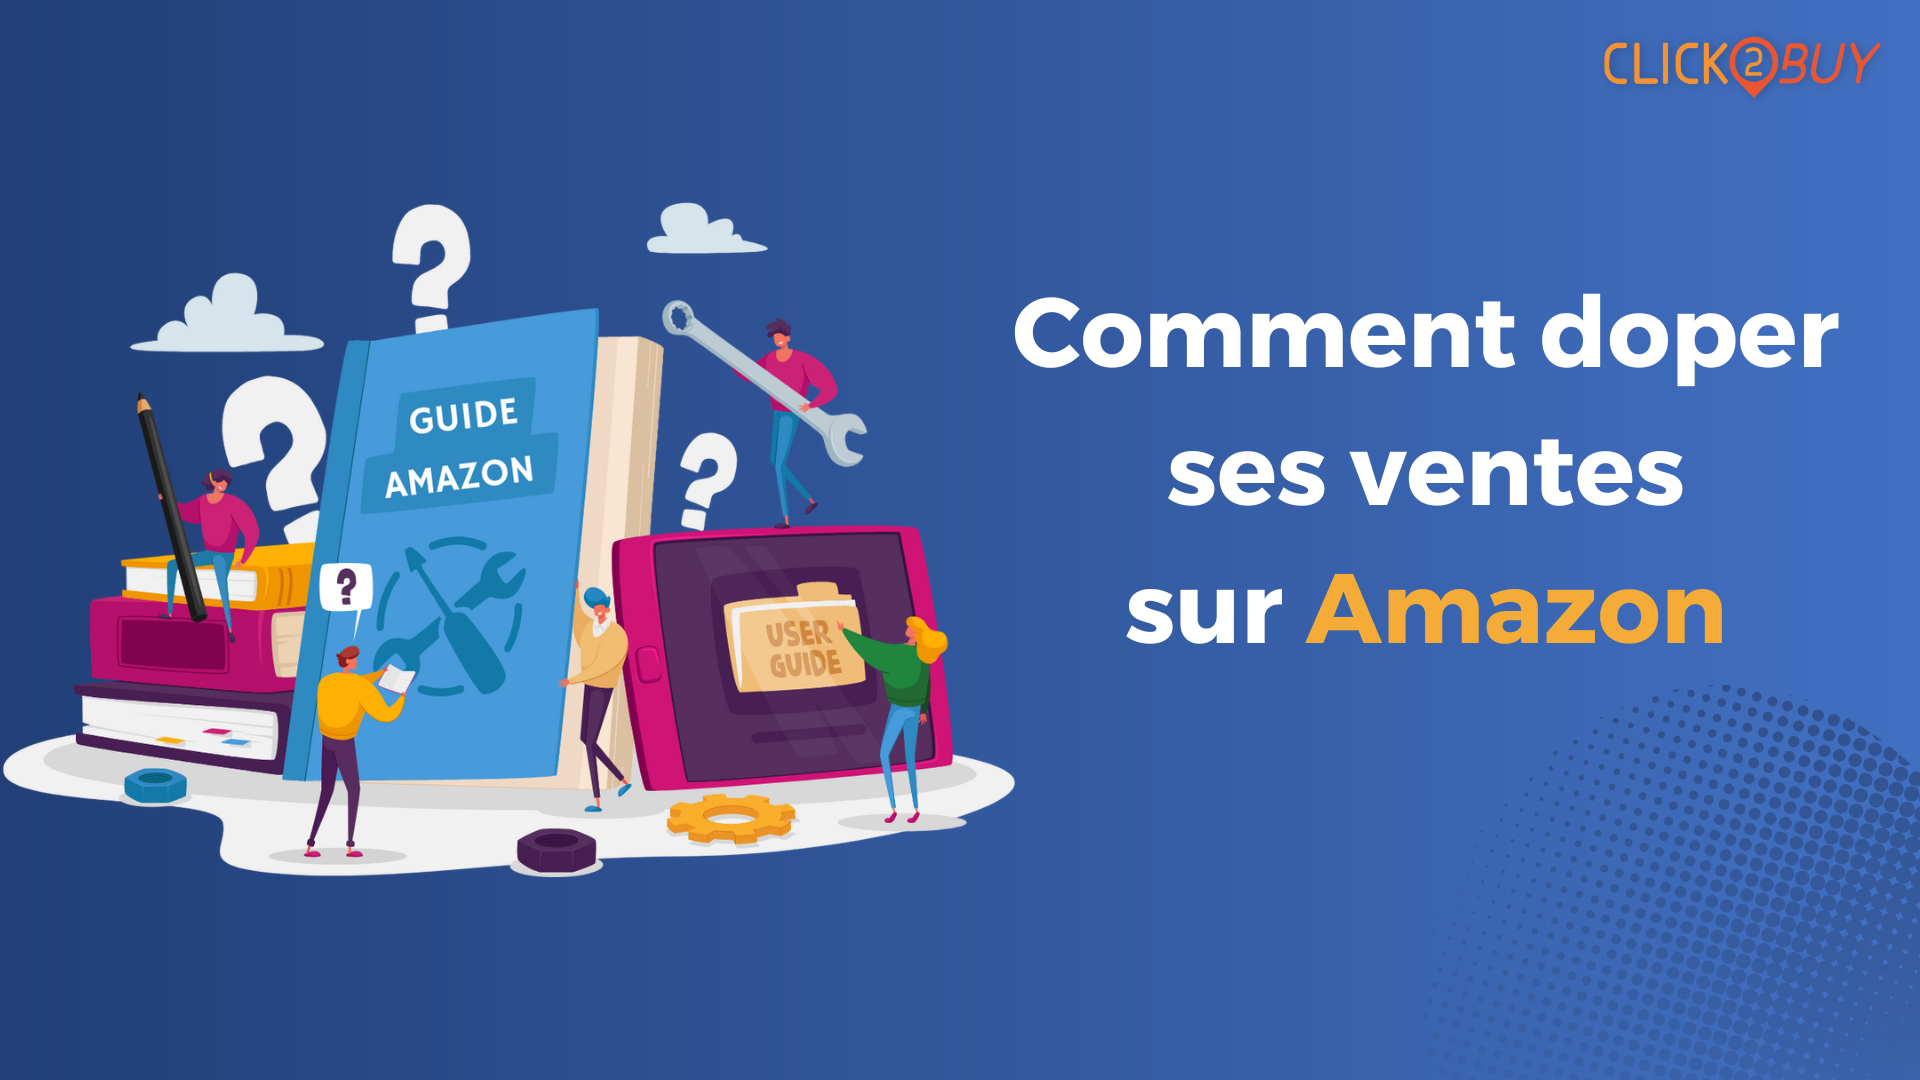 Guide Amazon FR